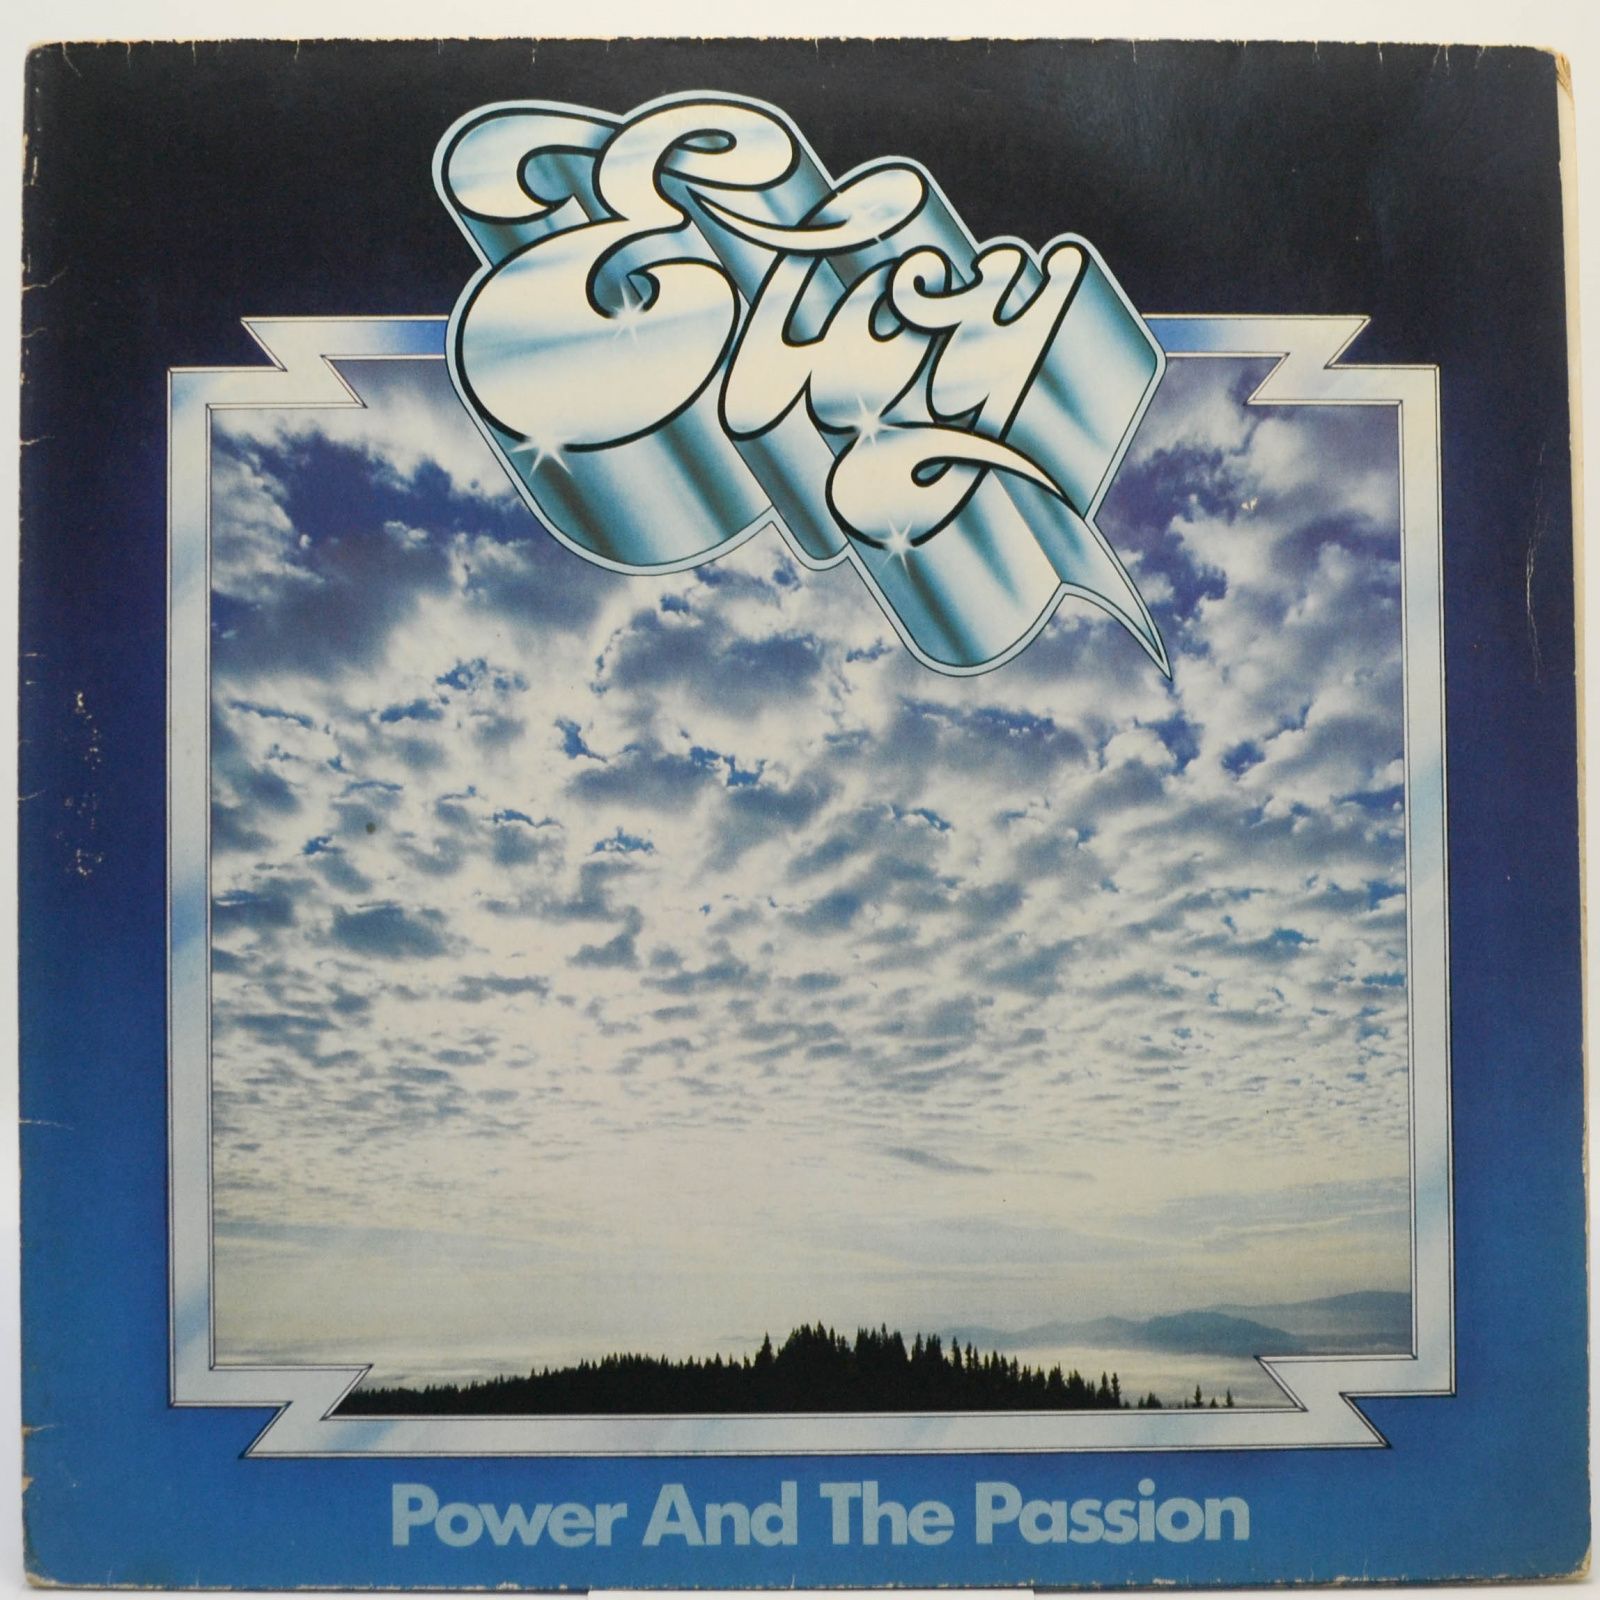 Eloy — Power And The Passion, 1975